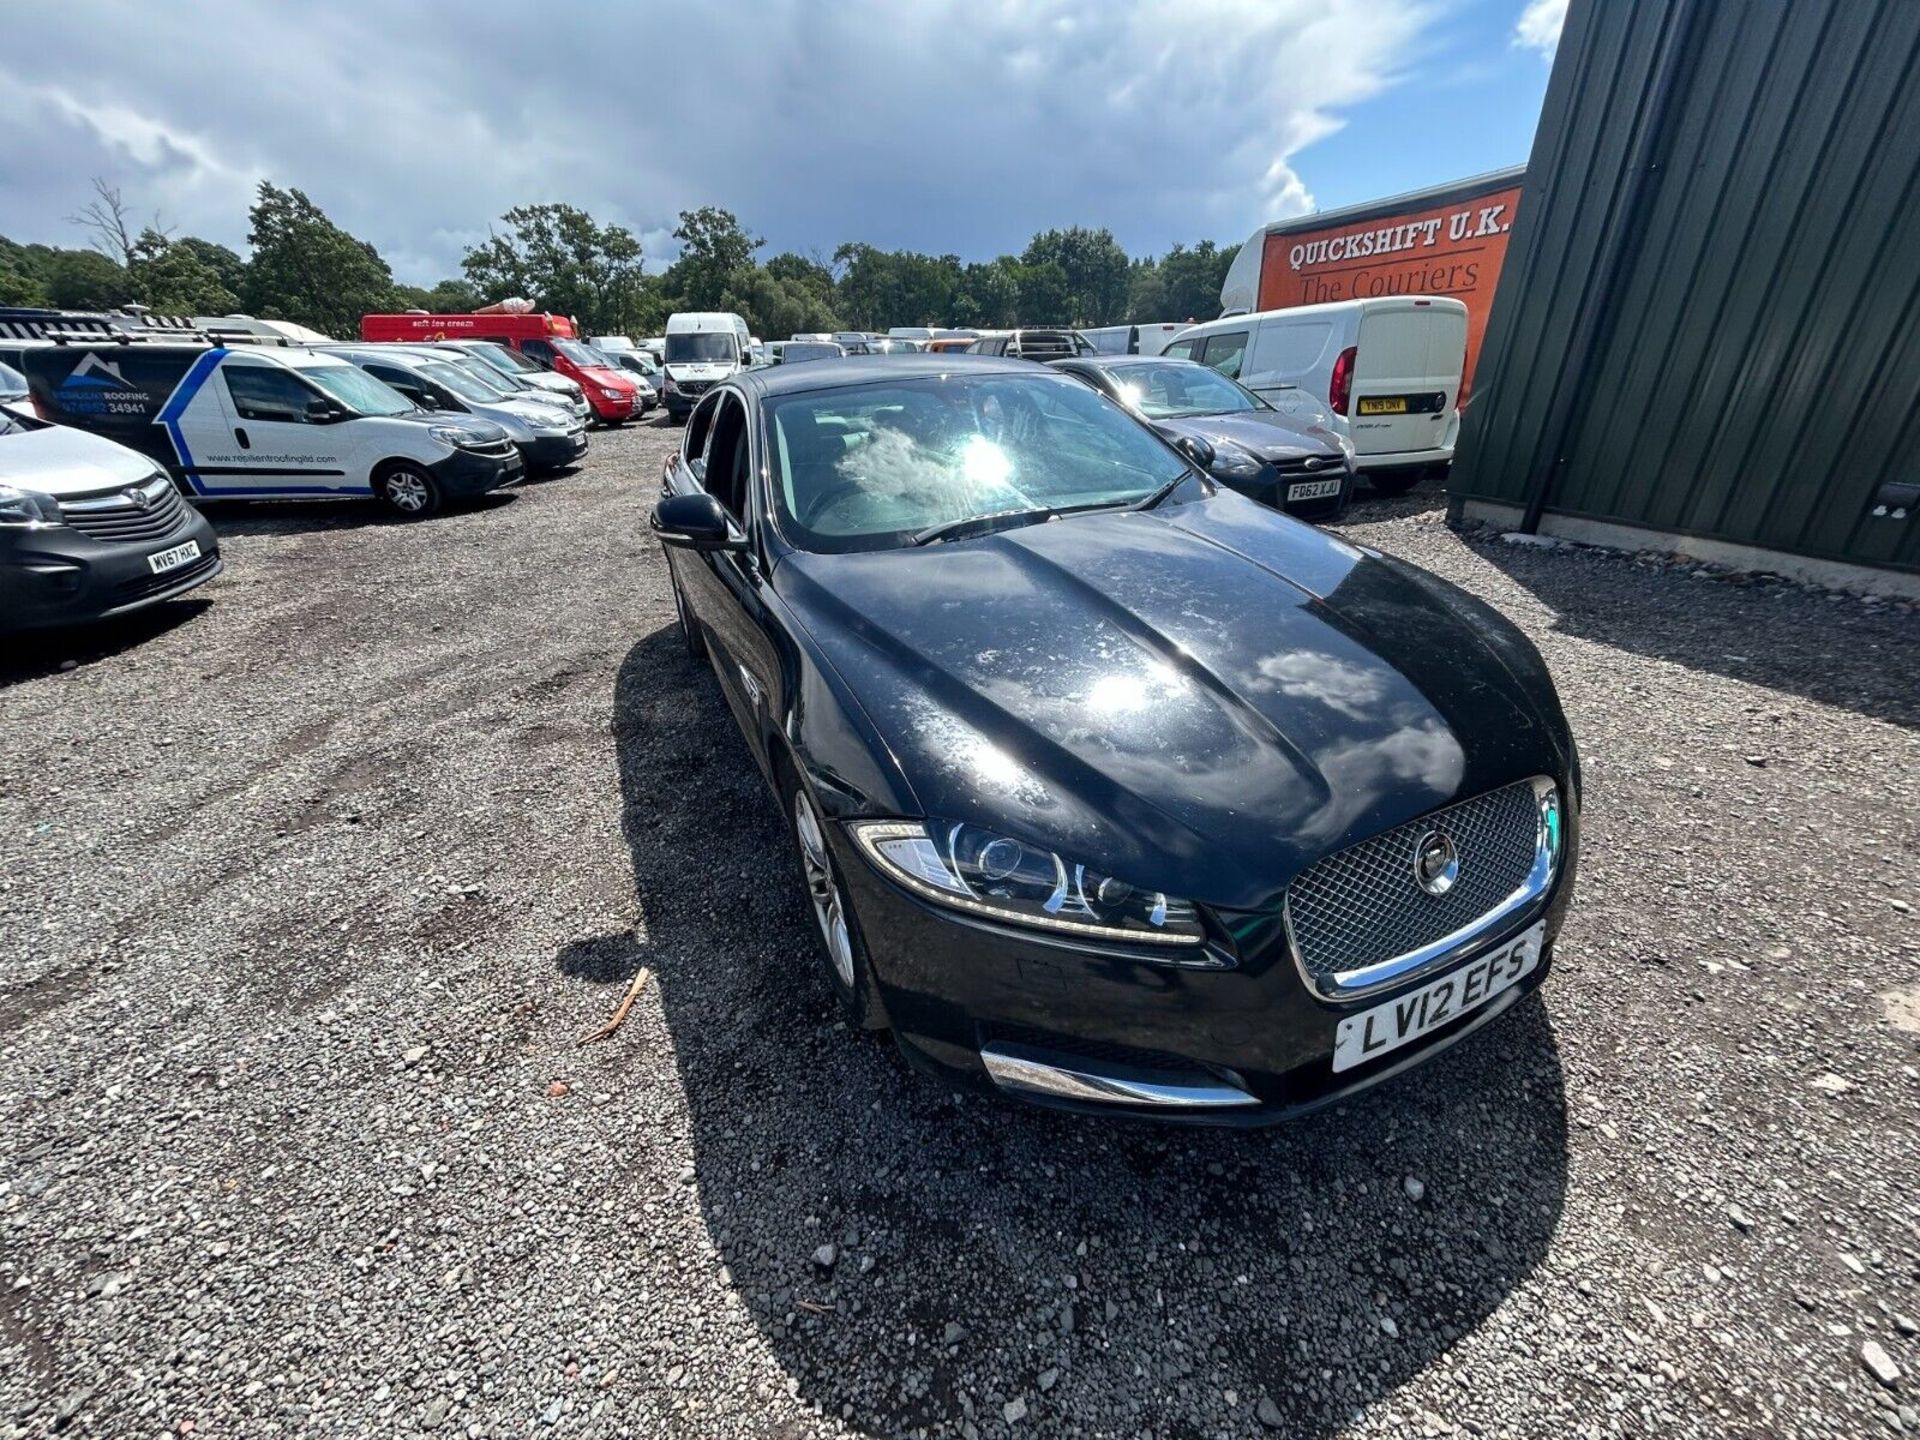 2012 JAGUAR XF LUXURY AUTOMATIC SWB SALOON 5 DOOR STARTS AND DRIVES - Image 2 of 15